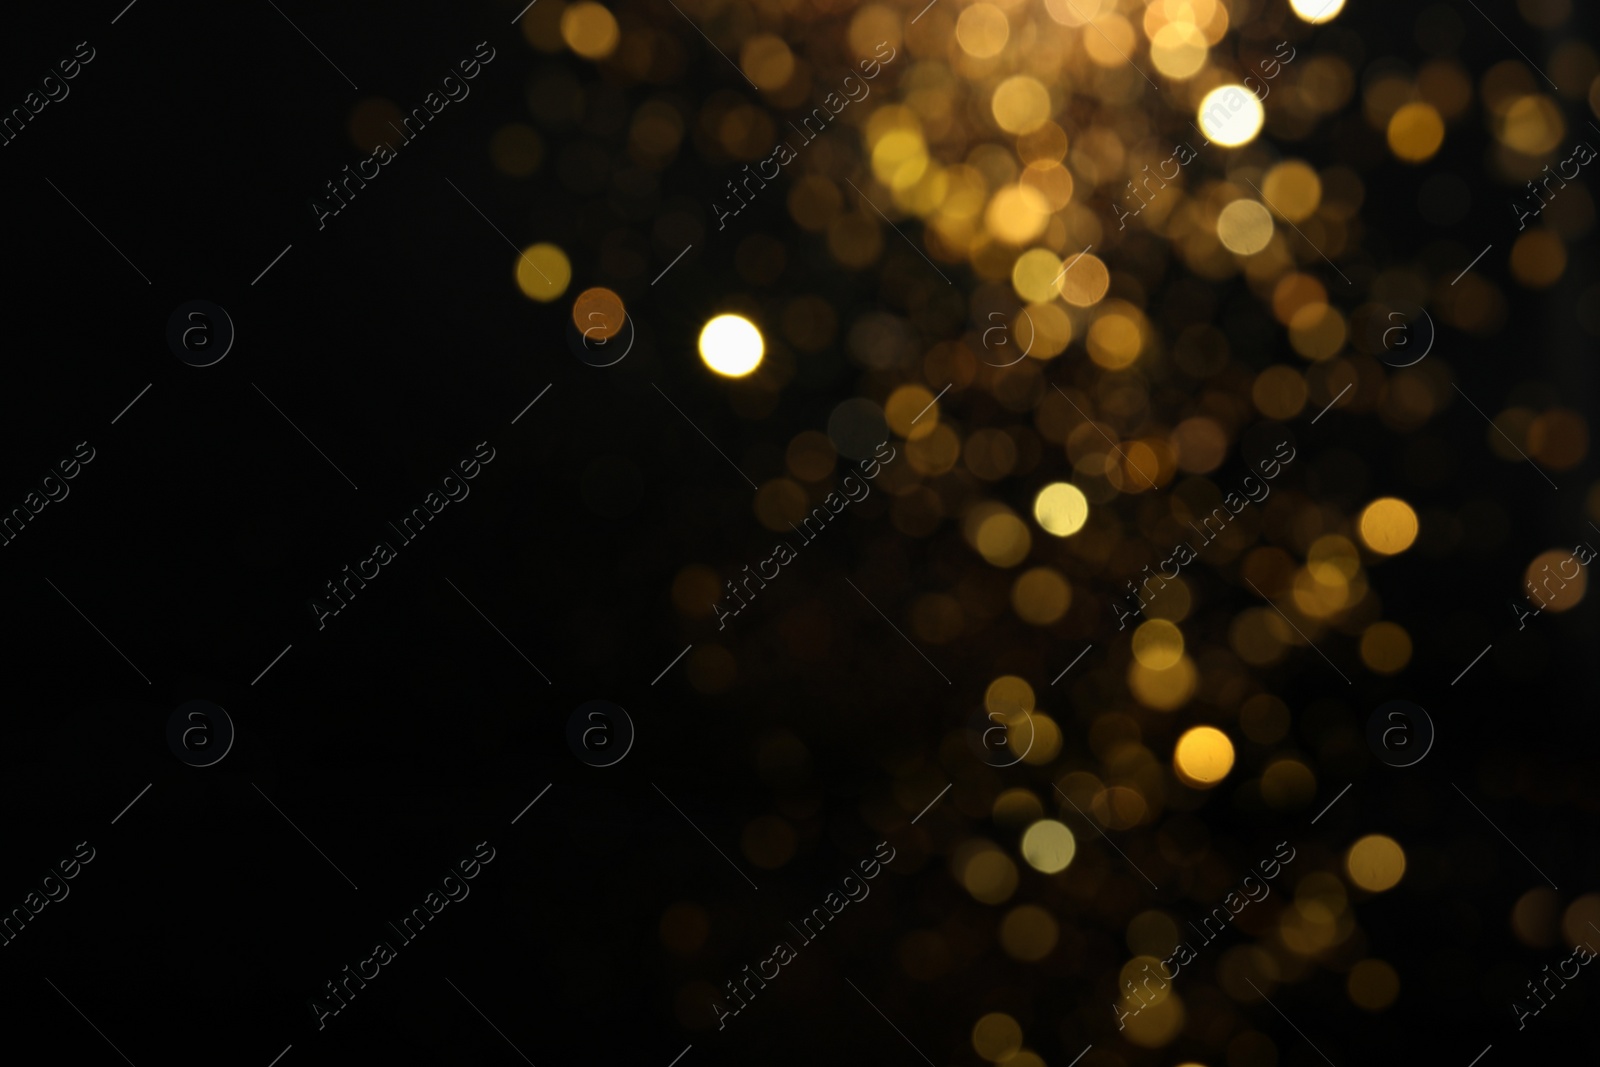 Photo of Blurred view of golden lights on black background. Bokeh effect